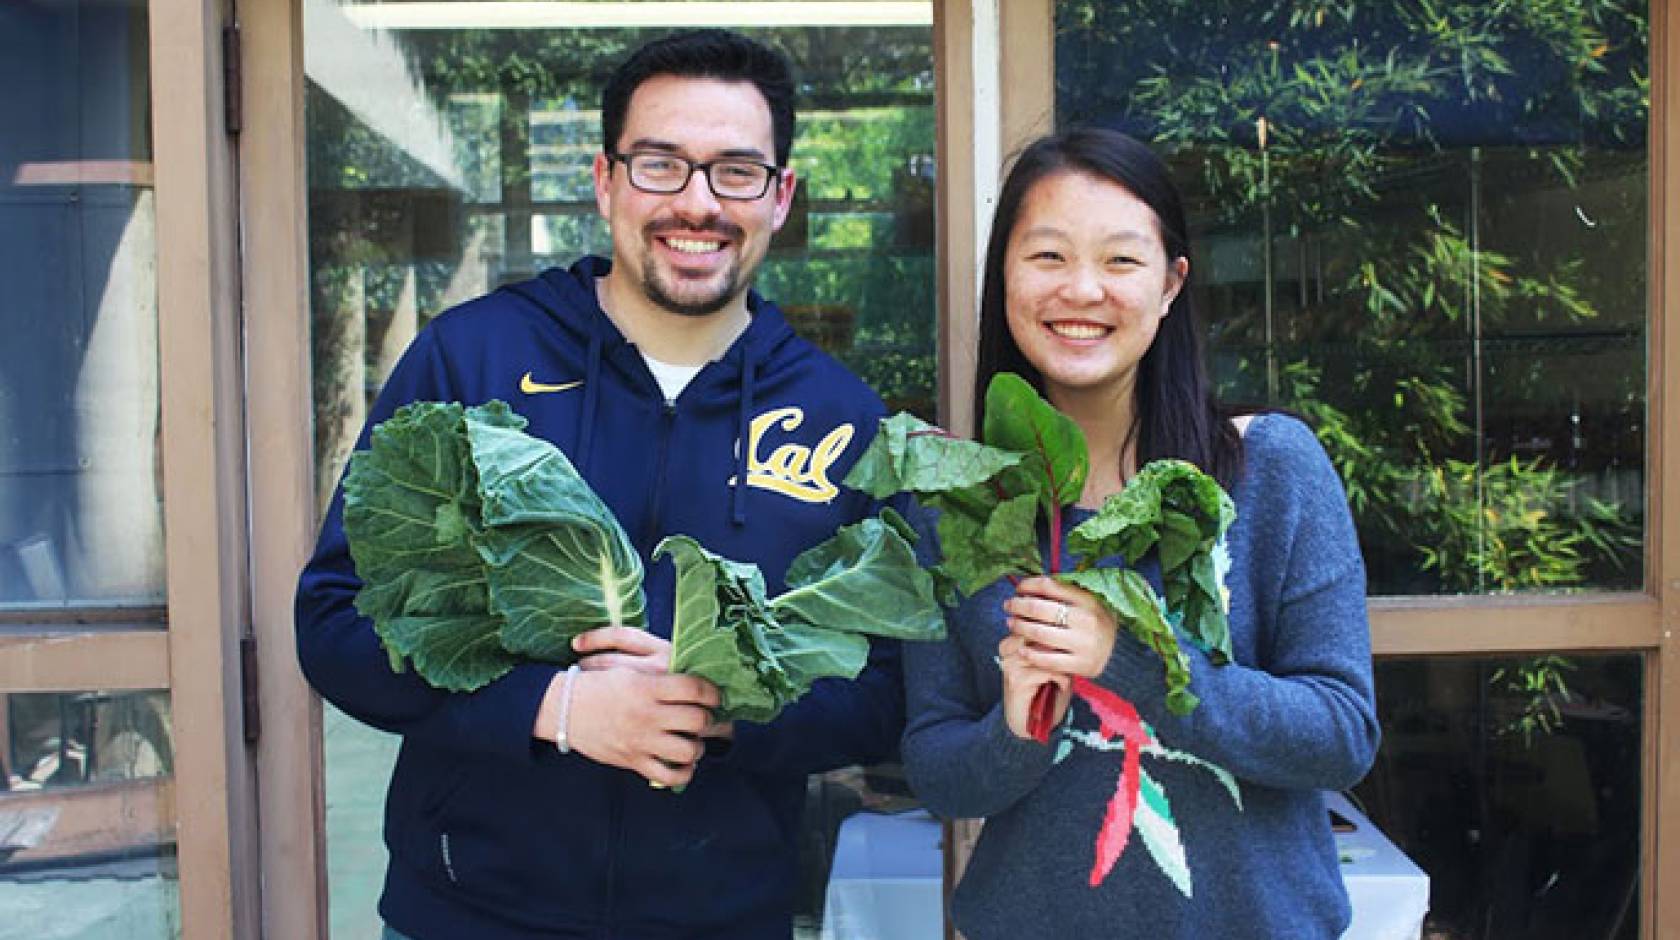 The UC Berkeley Food Pantry will benefit from the campus’s new relationship with Bank of the West.